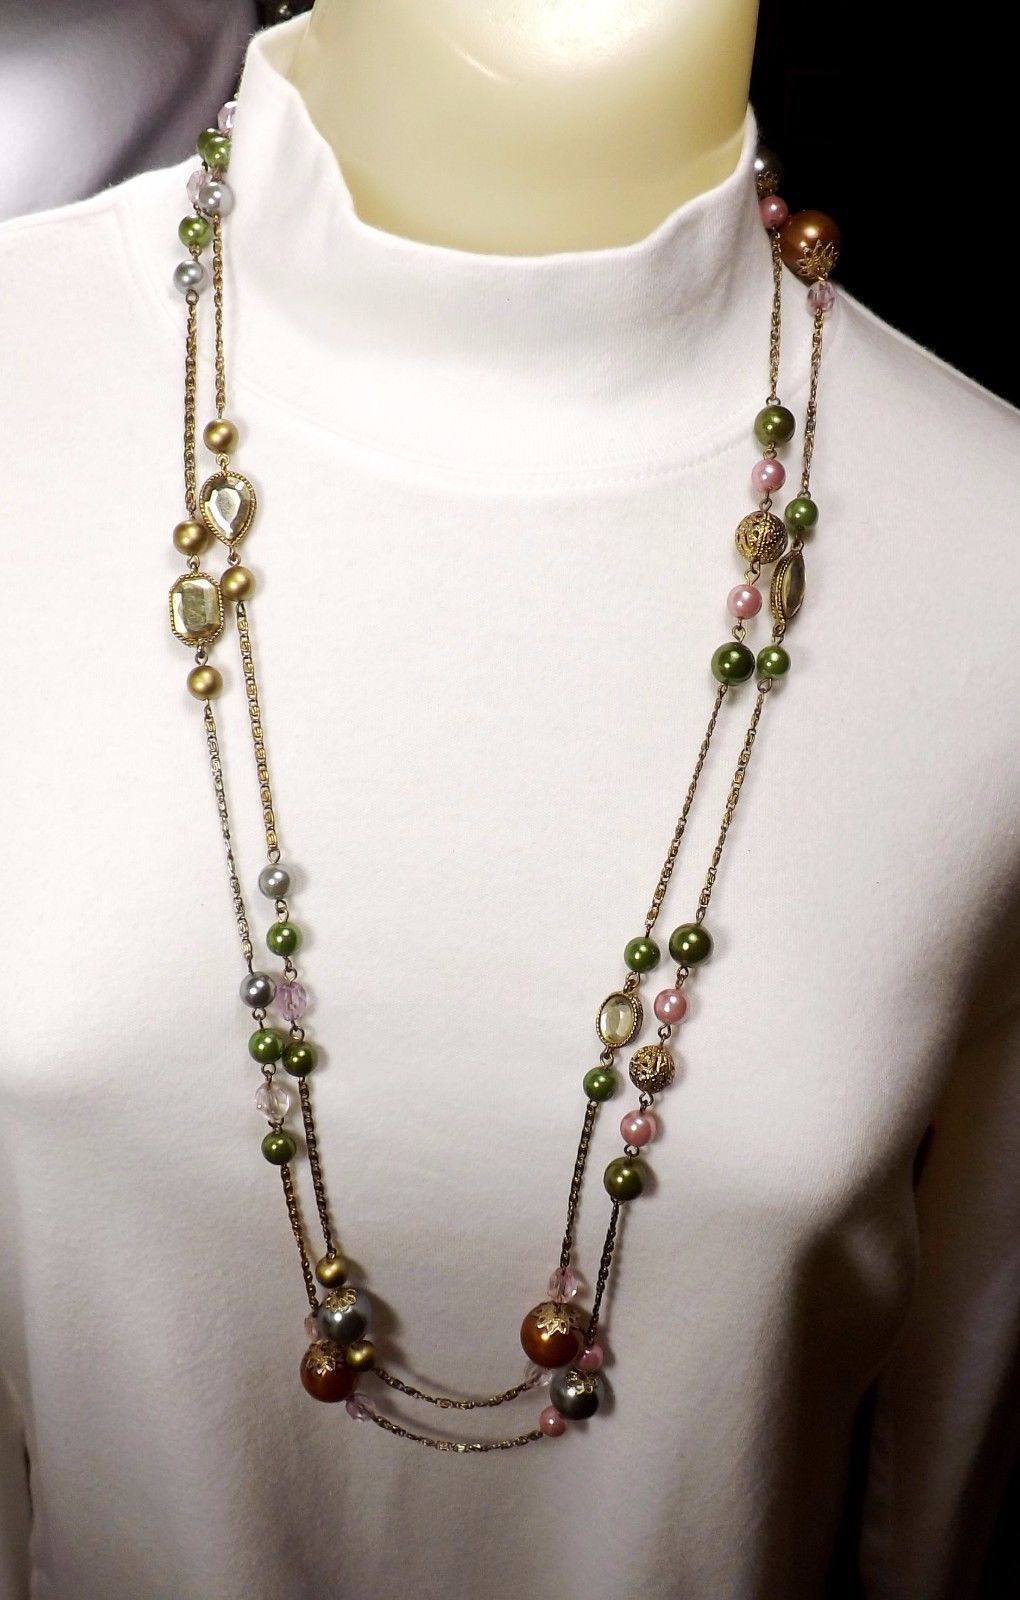 Super Long Colored Bead & Stones Chain Necklace Double or Triple Strands 70" - $7.25